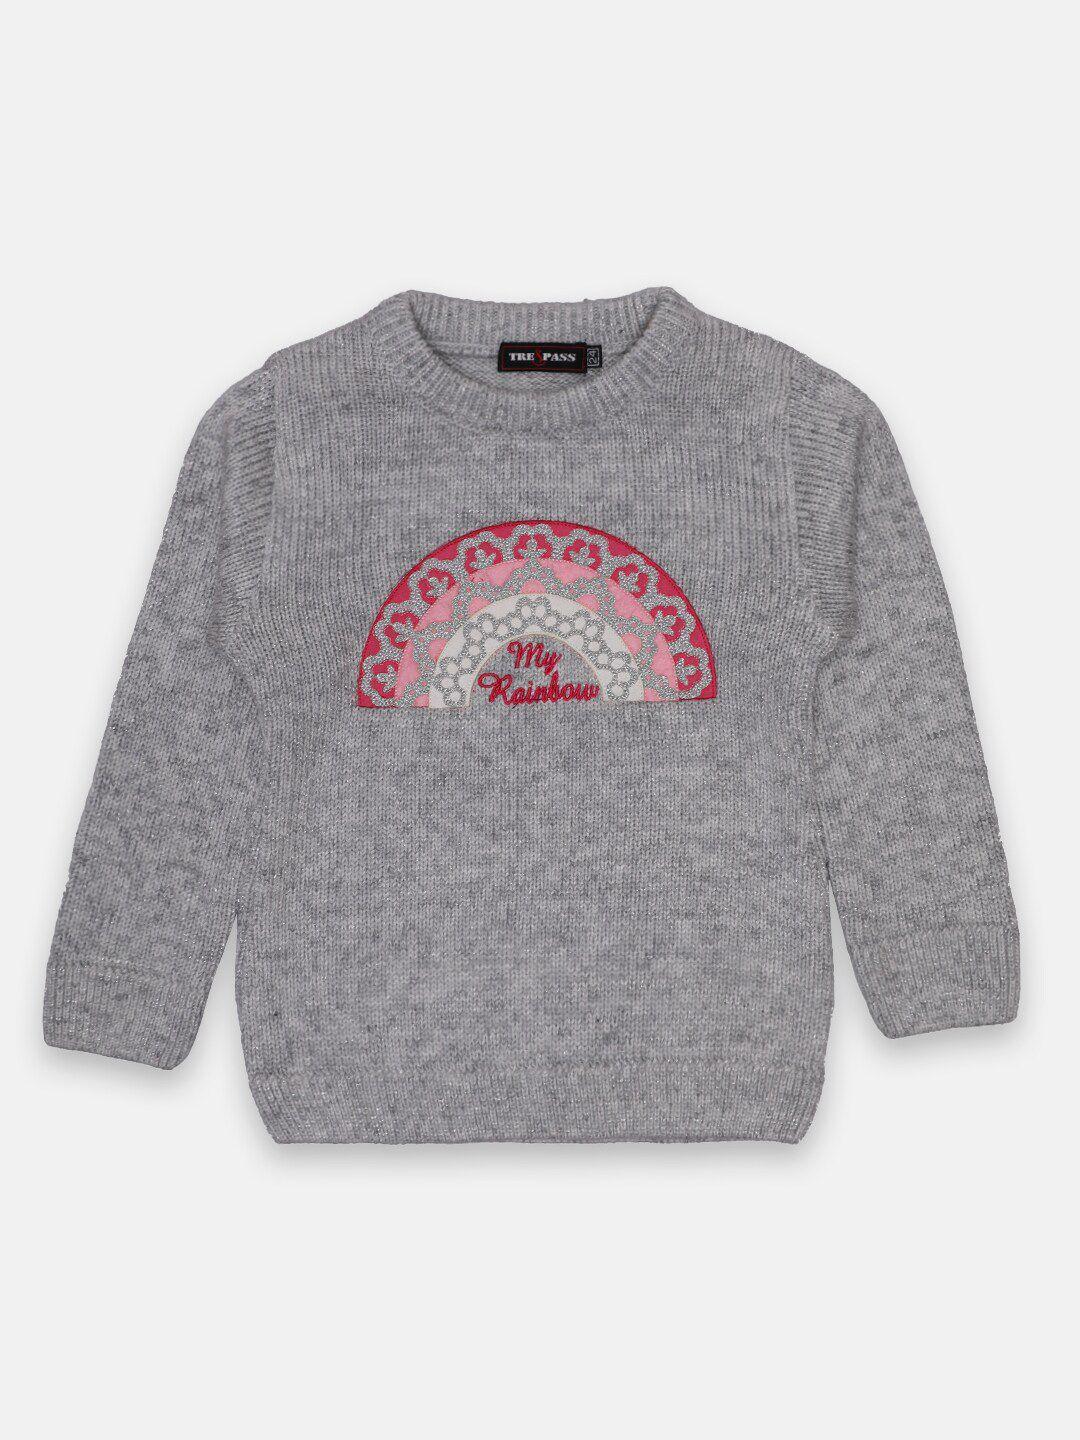 tre&pass boys grey & pink embroidered pullover with embroidered detail